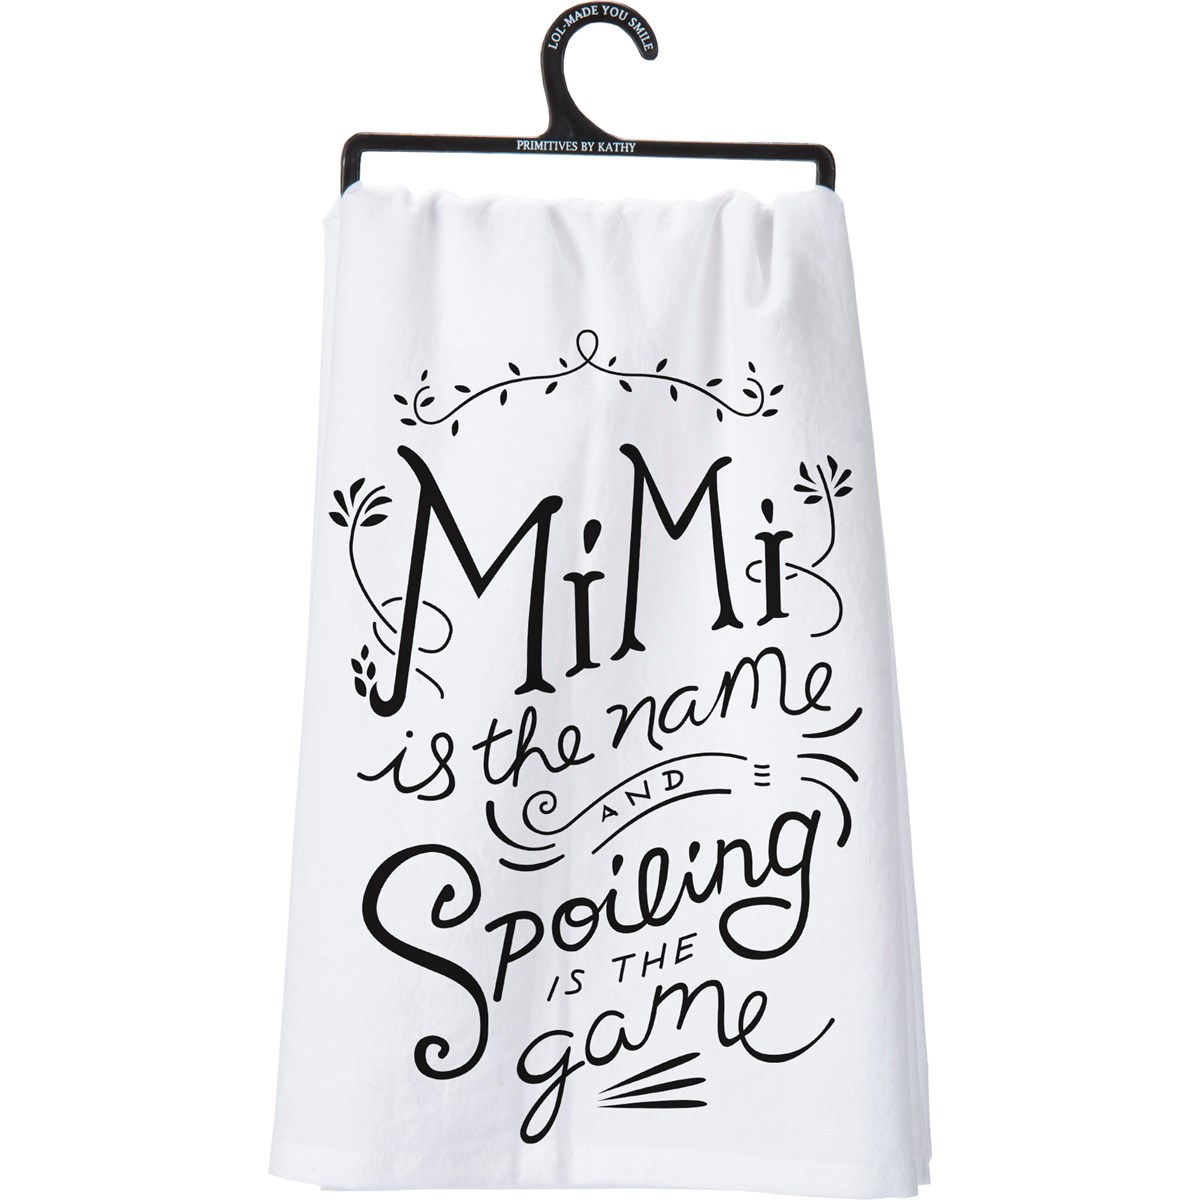 Mimi The Name Spoiling Is The Game Kitchen Towel - Cotton